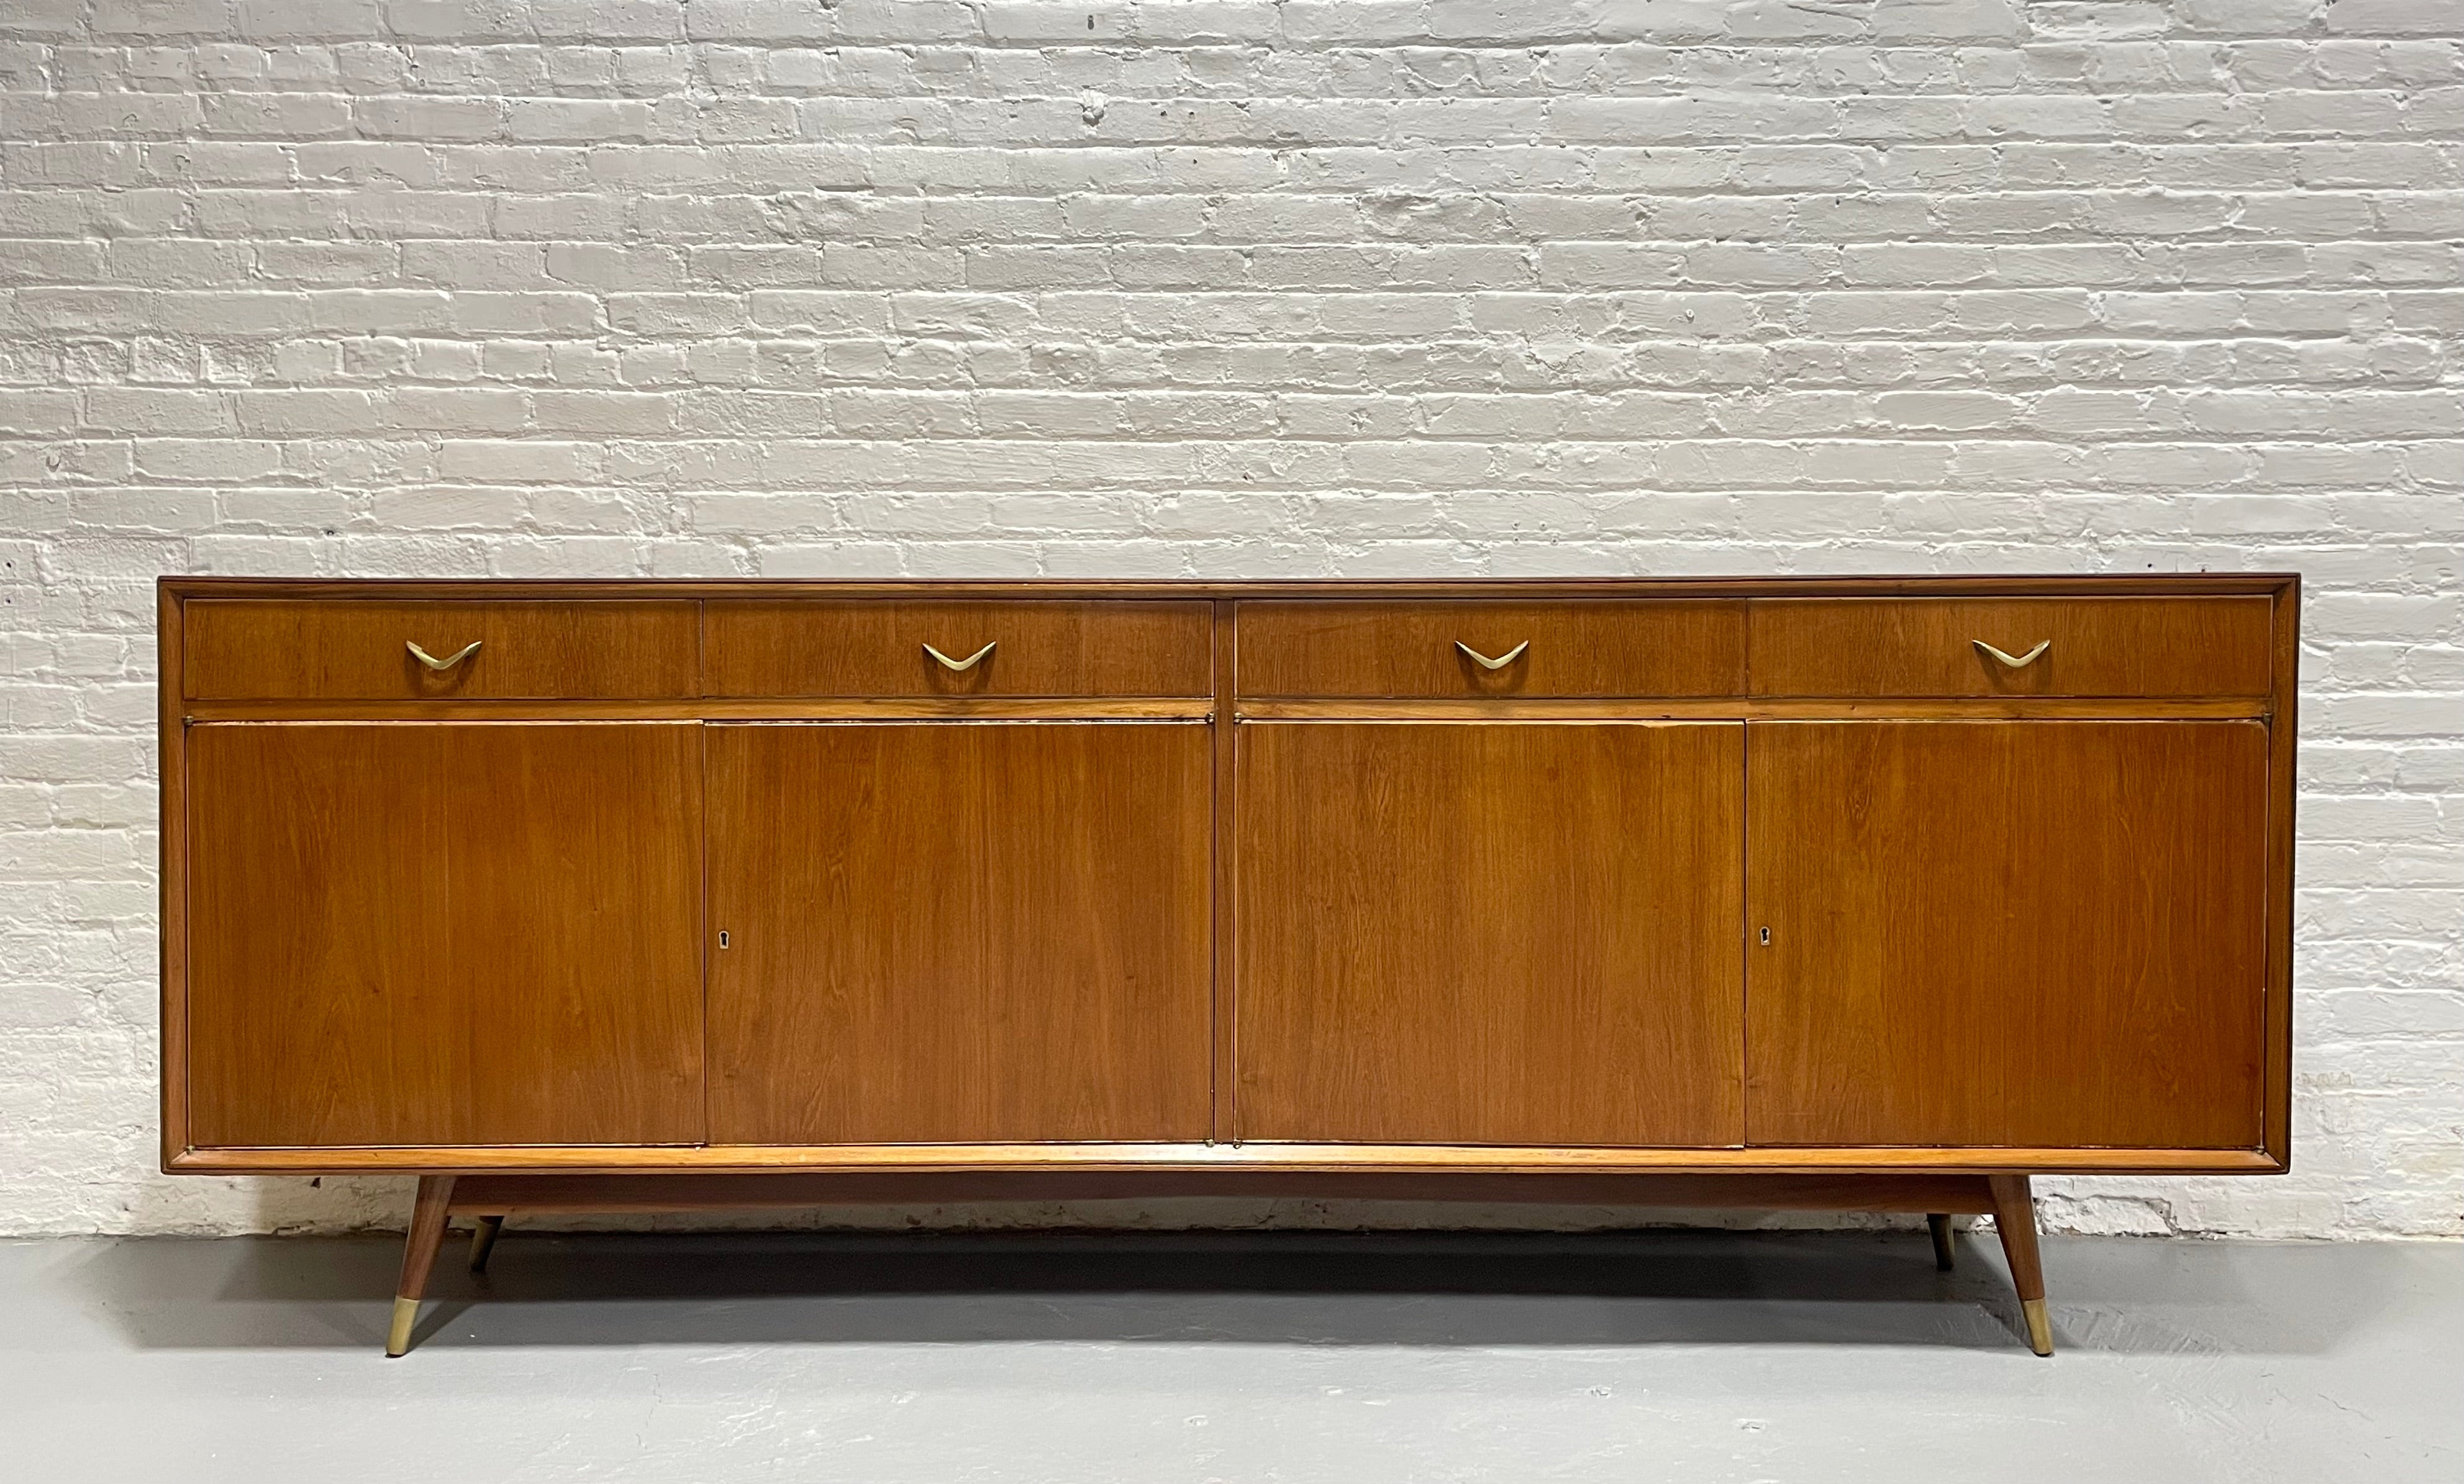 Extra Long CLASSIC Mid Century MODERN French CREDENZA / media stand, c. 1960s